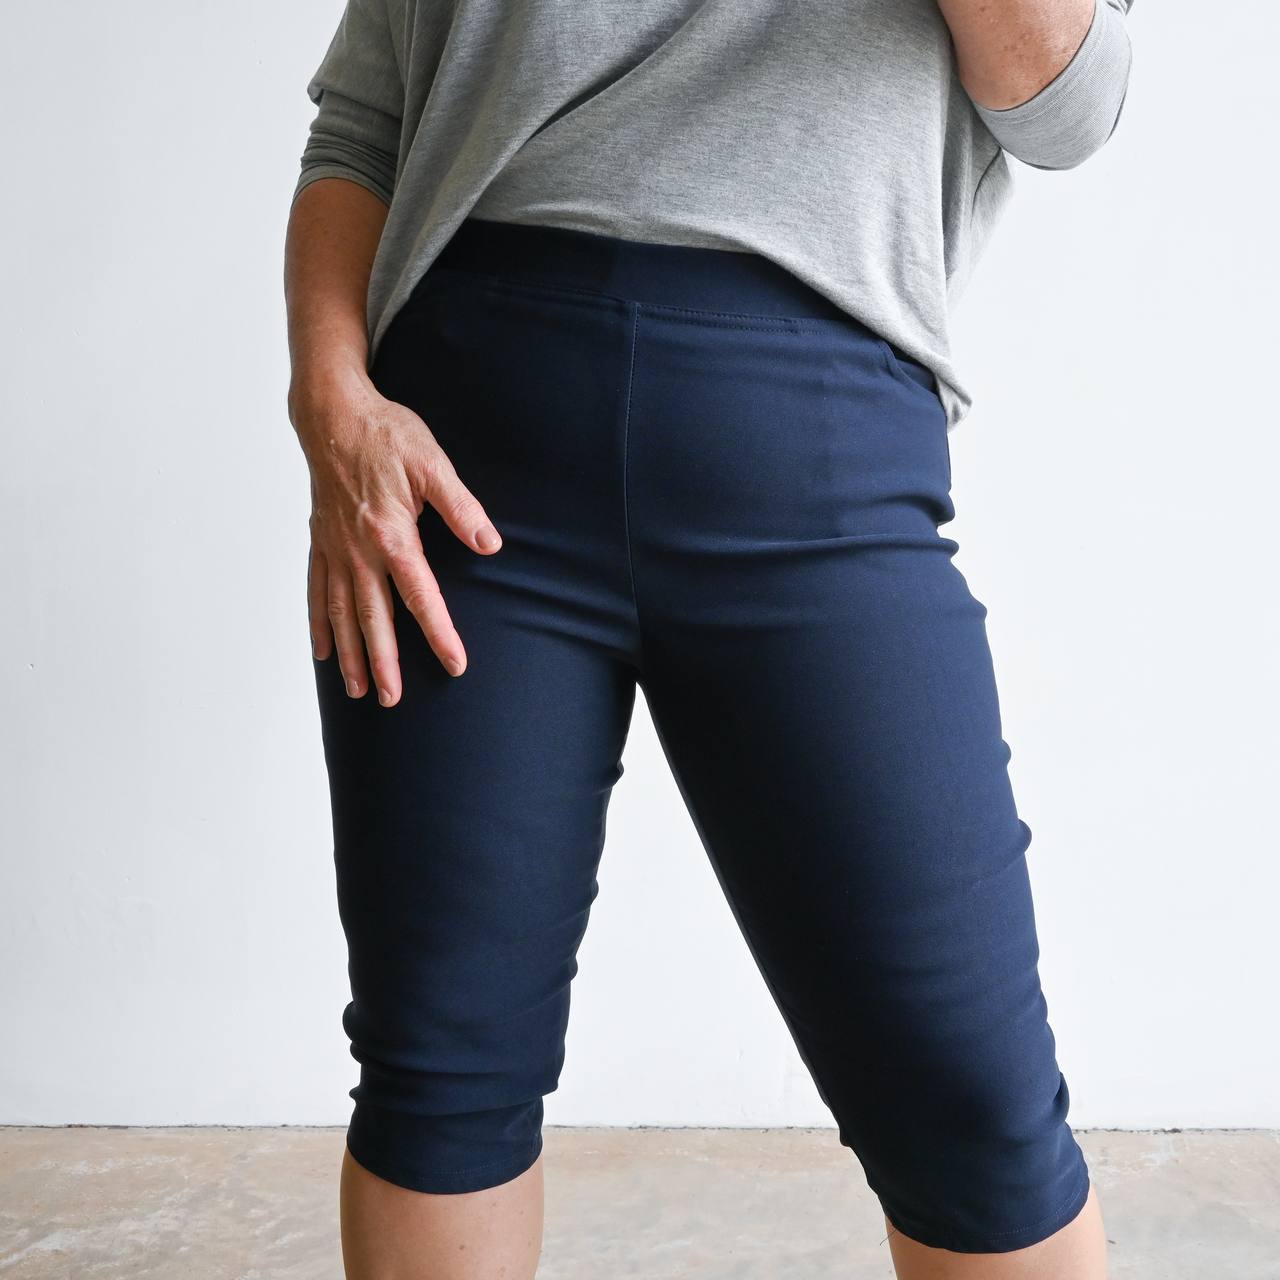 Short capri stretch pants with pockets - black, white, navy blue and ...